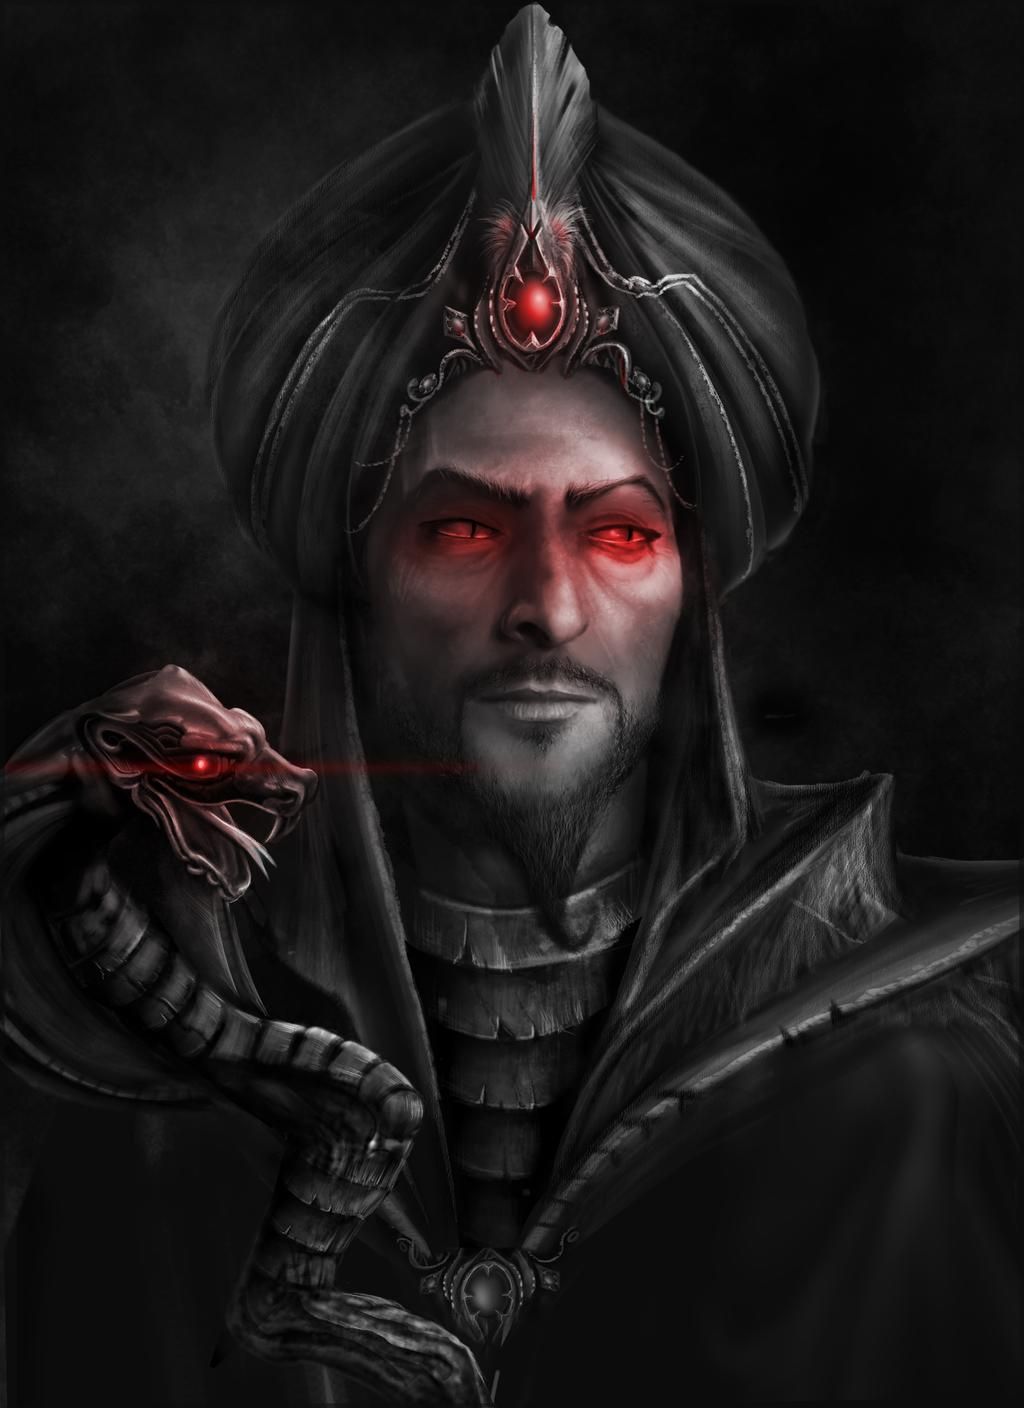 Aladdin 10 Fan Art Pieces Of Jafar That Will Give You The Chills